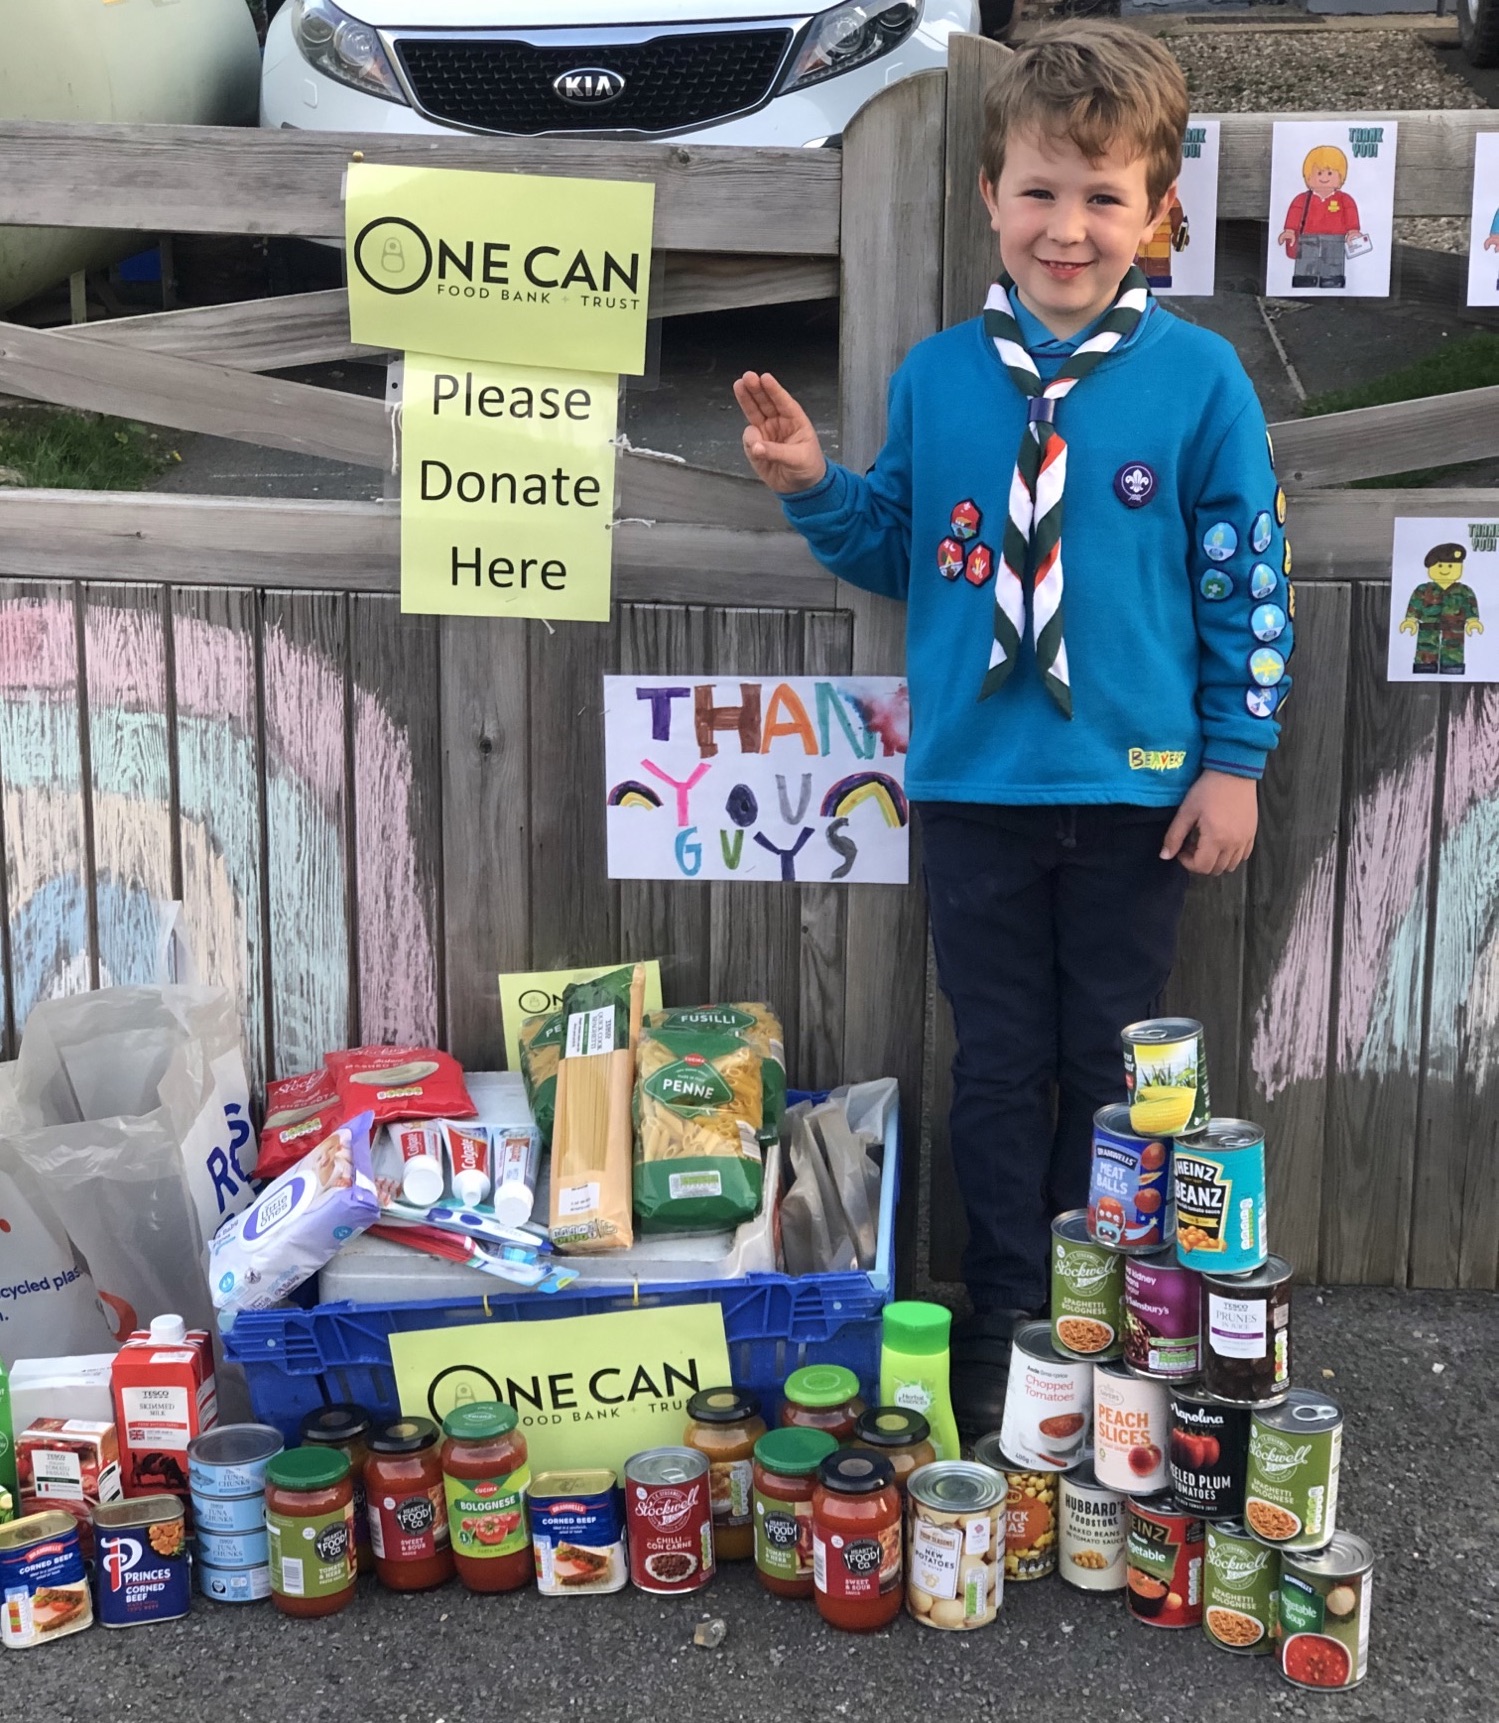 A Beaver in uniform with badges and a necker is holding his hand in the Scout salute in front of a fence. A sign behind him says 'Please Donate Here' and in front of him are lots of cans and tins of long-life food.